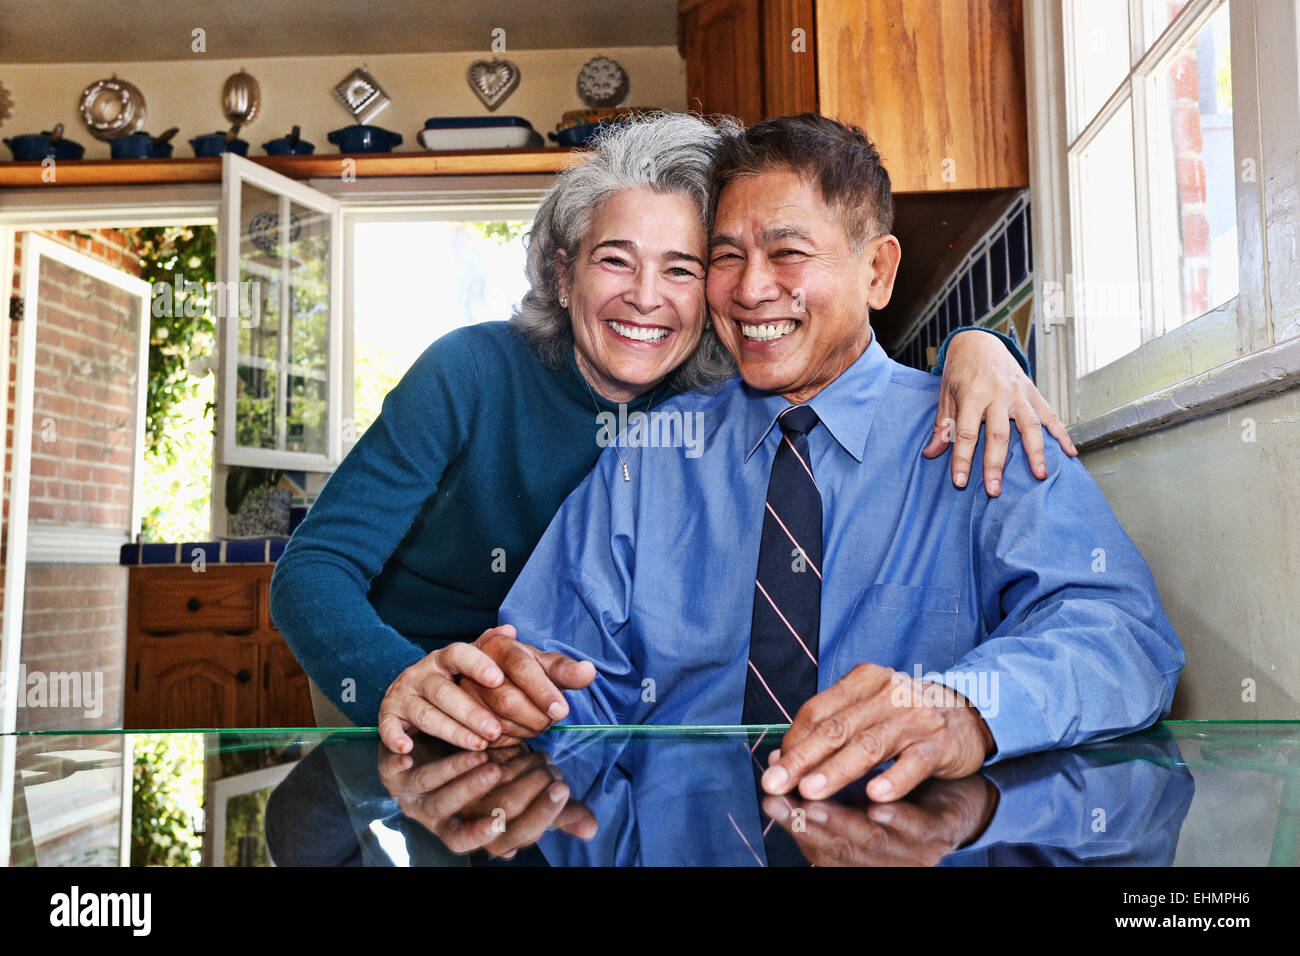 Couple smiling in kitchen Stock Photo